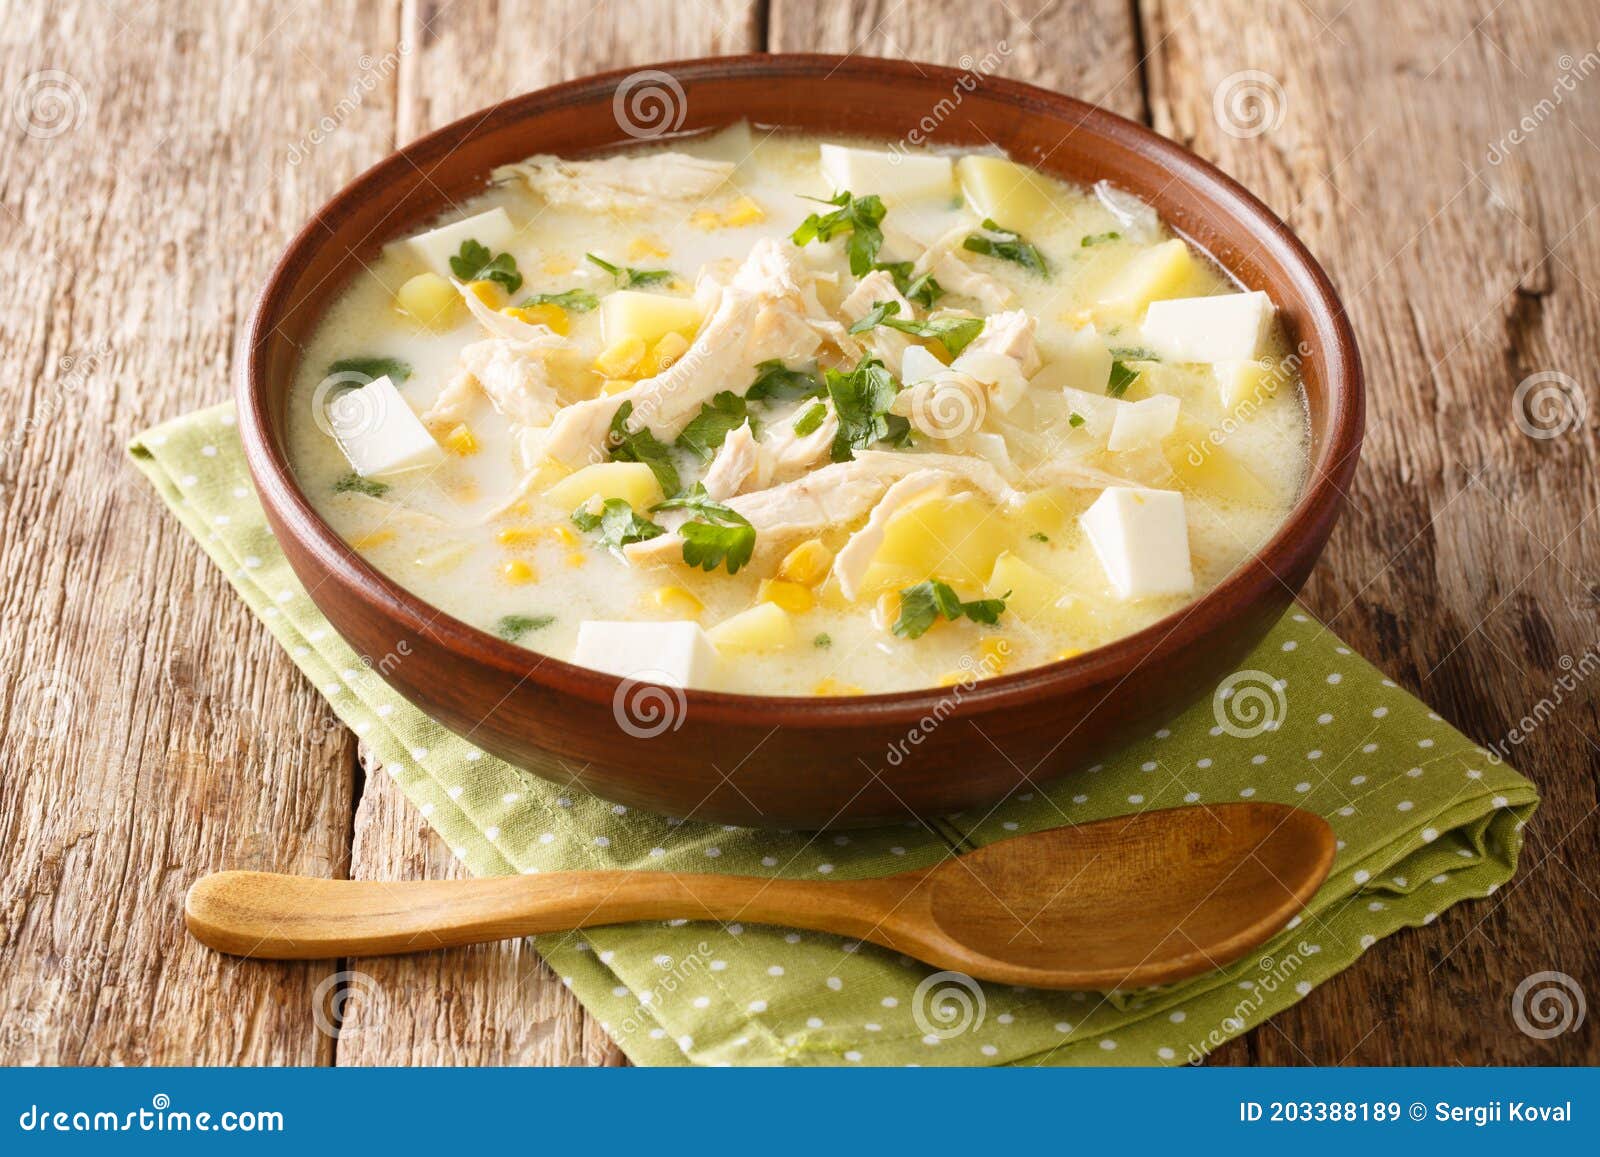 authentic chupe andino soup made from chicken, corn, fresh cheese, vegetables and cream close-up in a bowl. horizontal